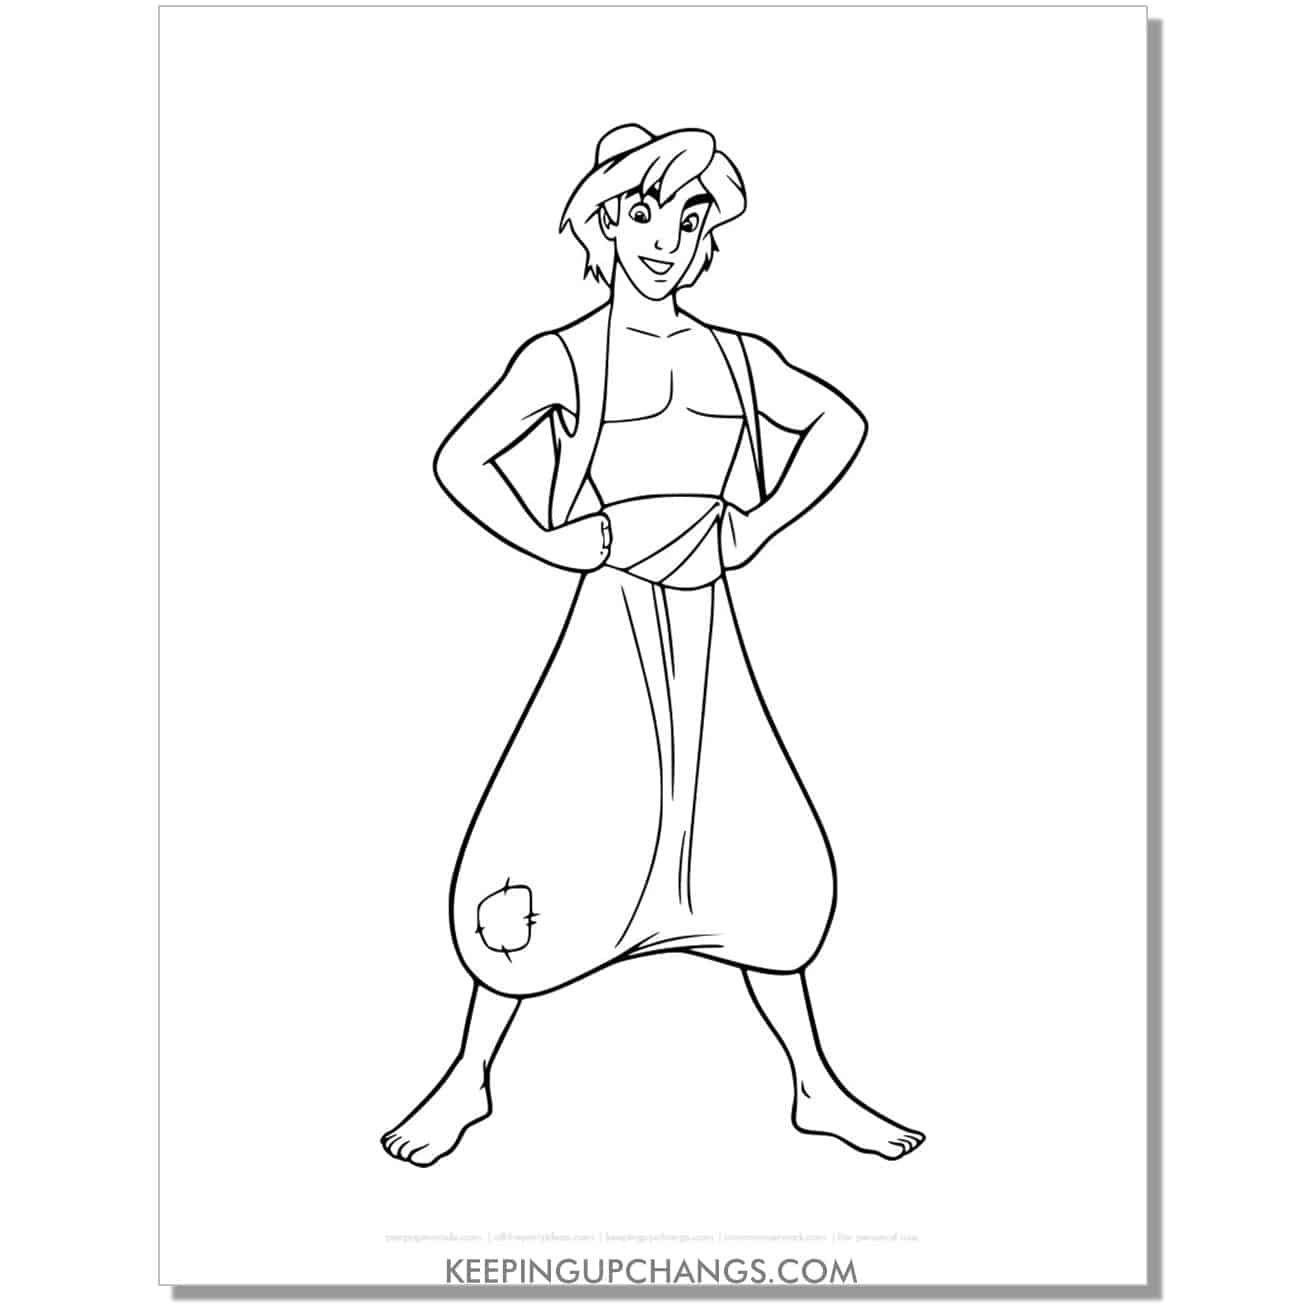 aladdin arms on hips coloring page, sheet.